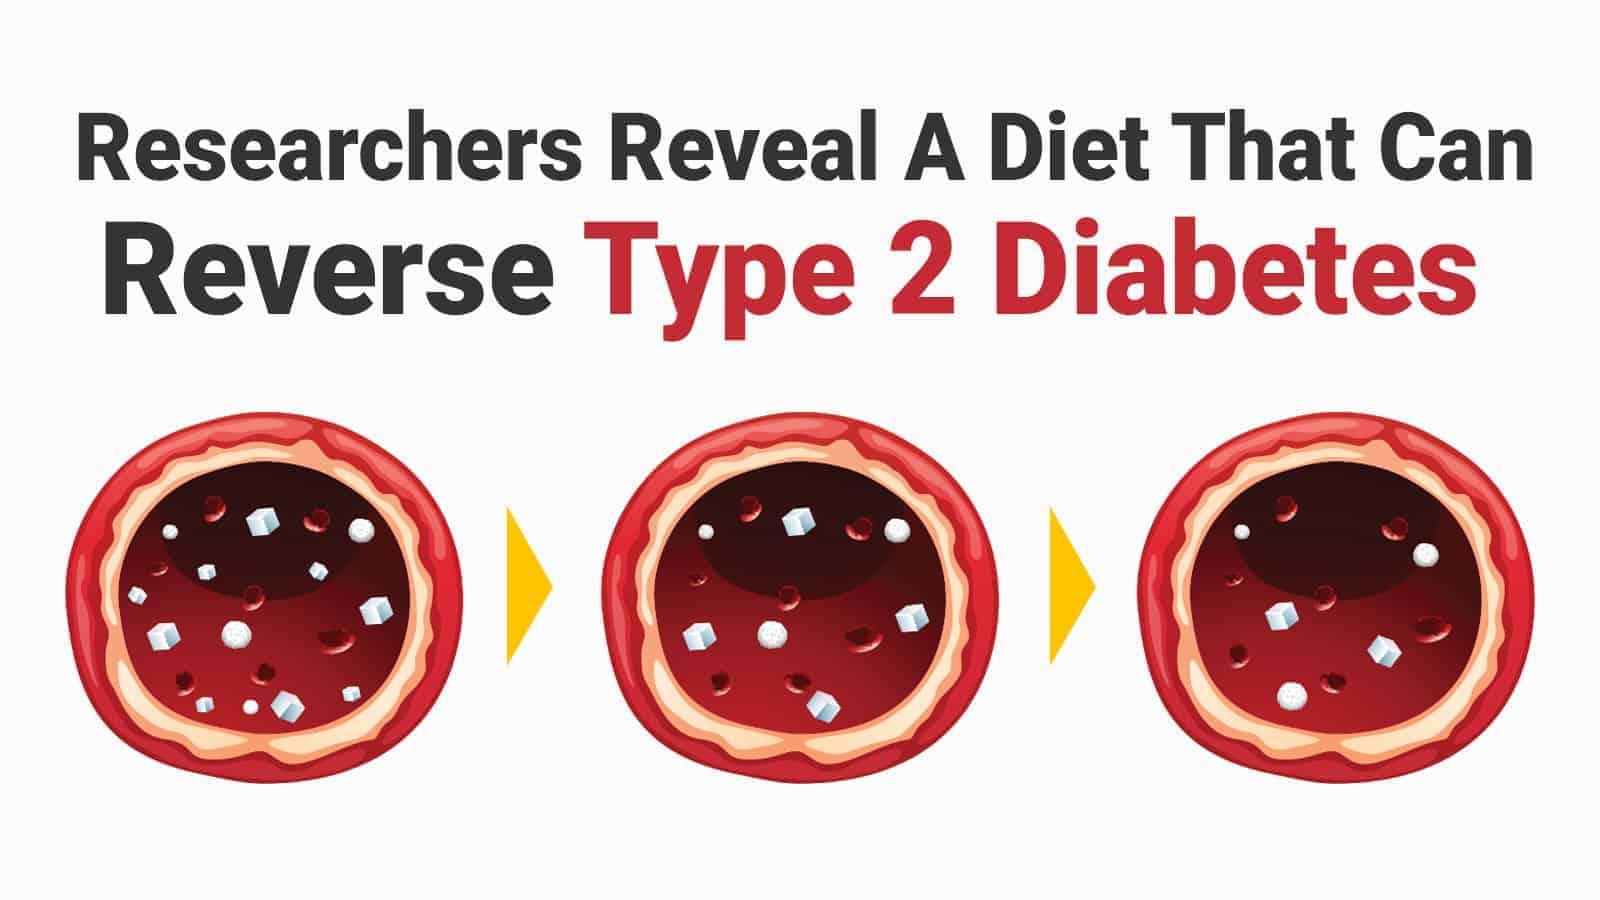 Researchers Reveal A Diet That Can Reverse Type 2 Diabetes